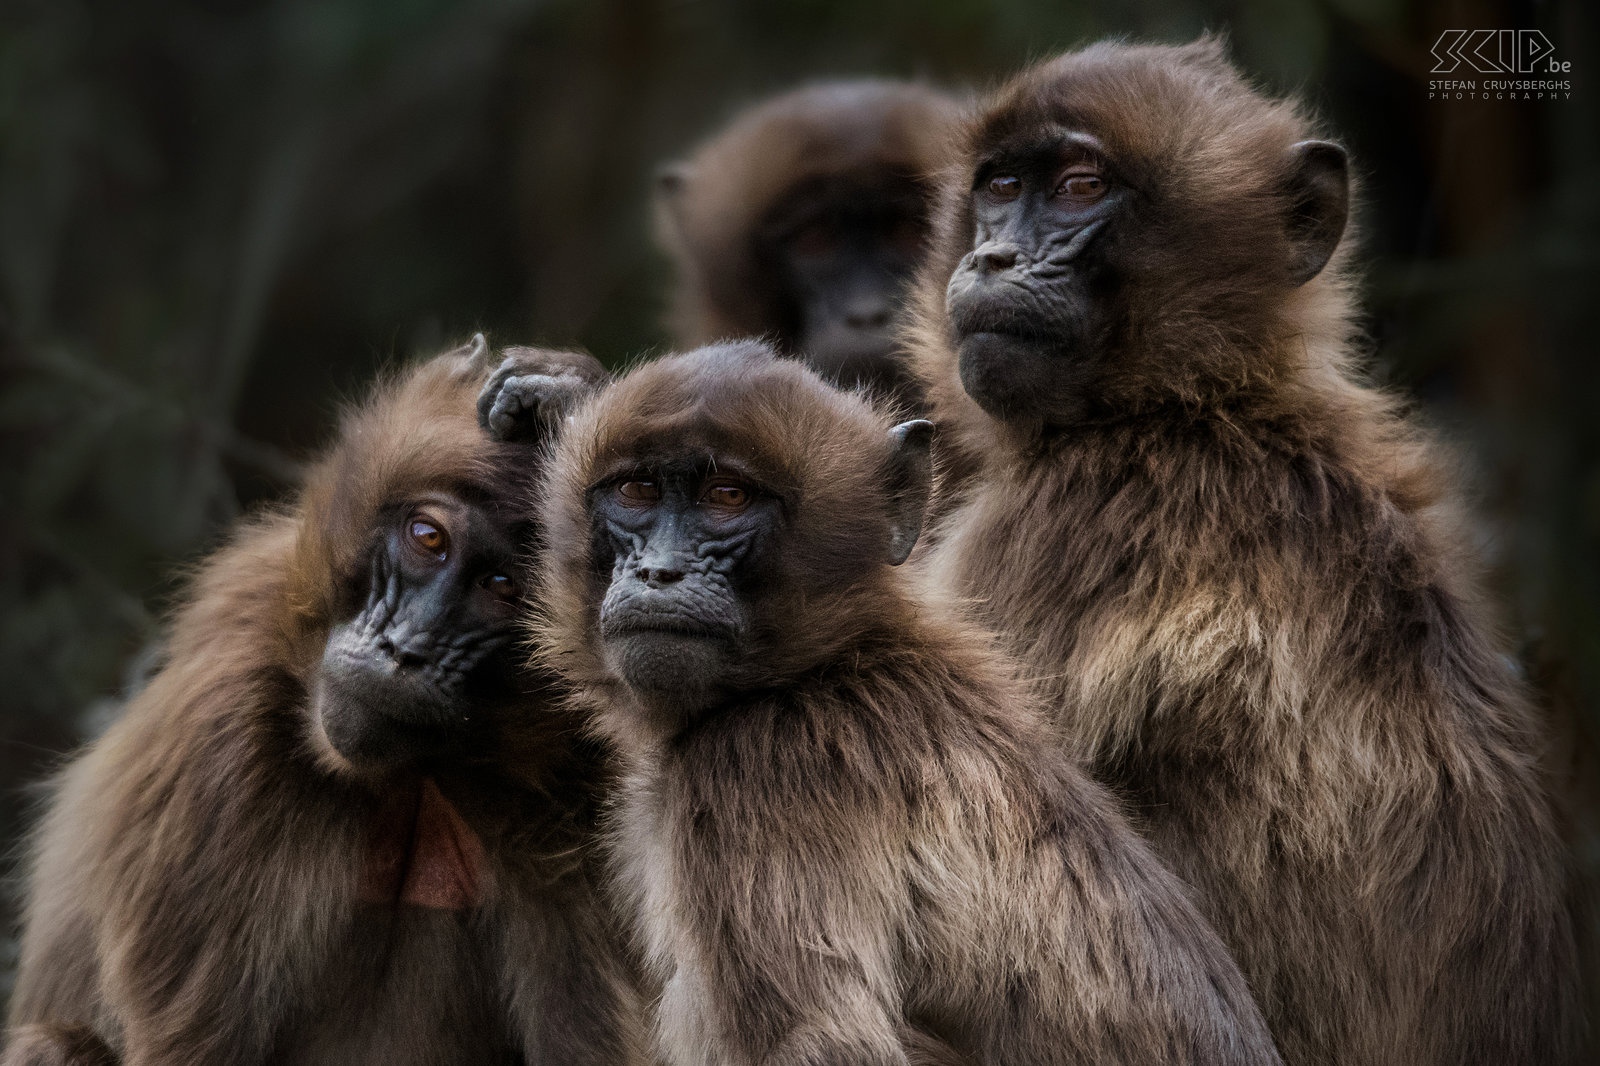 Debre Libanos - Young geladas The gelada (Theropithecus gelada) is a baboon species that only lives in the high mountains of northern Ethiopia. They mainly feed on grass that they pick with their hands. Gelada's life in large groups.  Stefan Cruysberghs